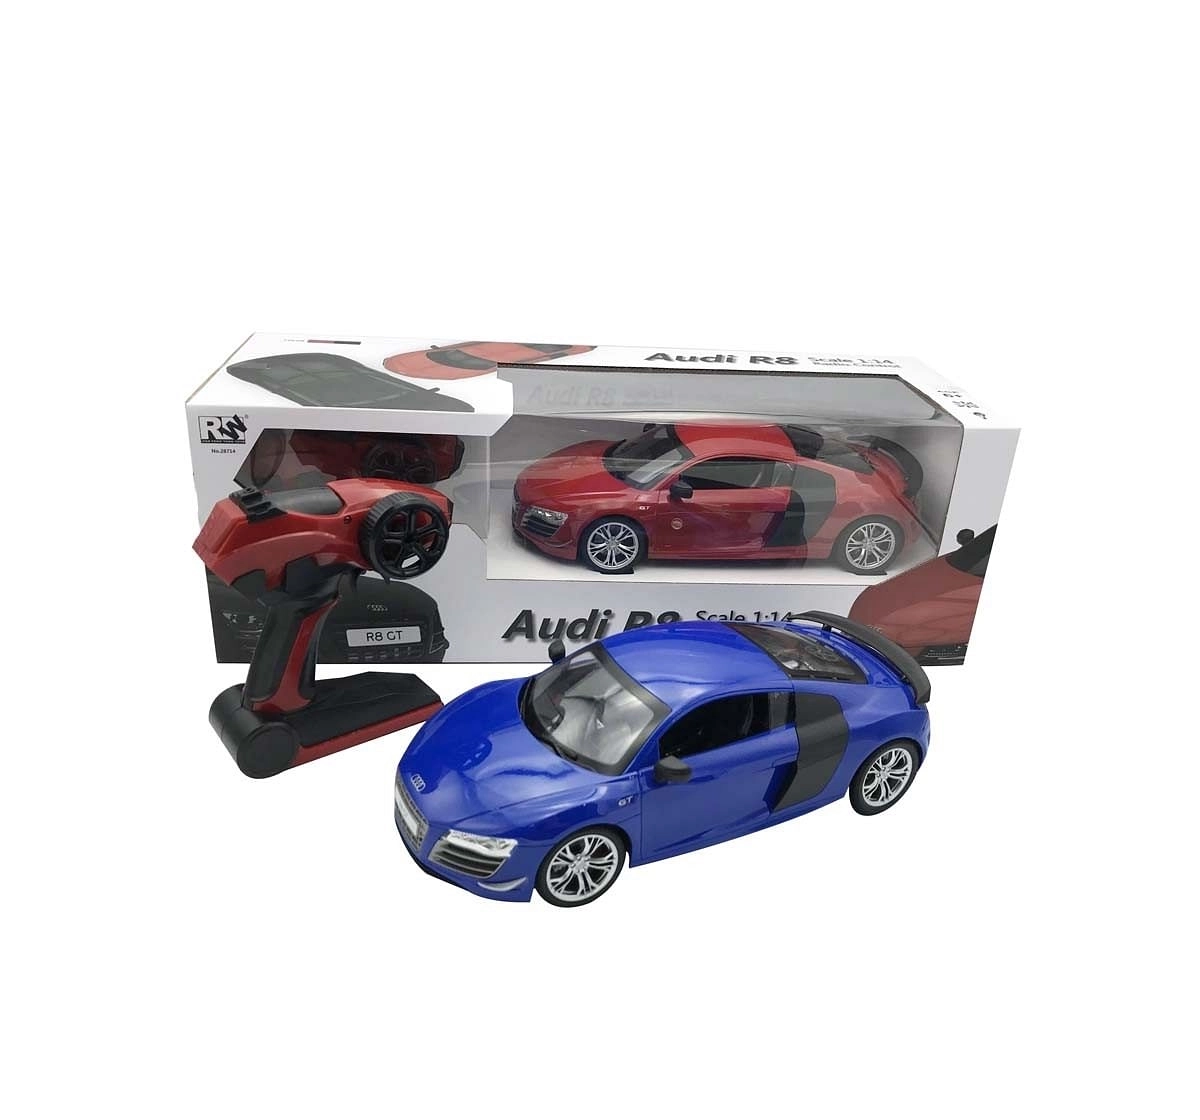 Rowan 1:14 Audi R8 Gt with Remote Control Toys for Kids age 6Y+ 